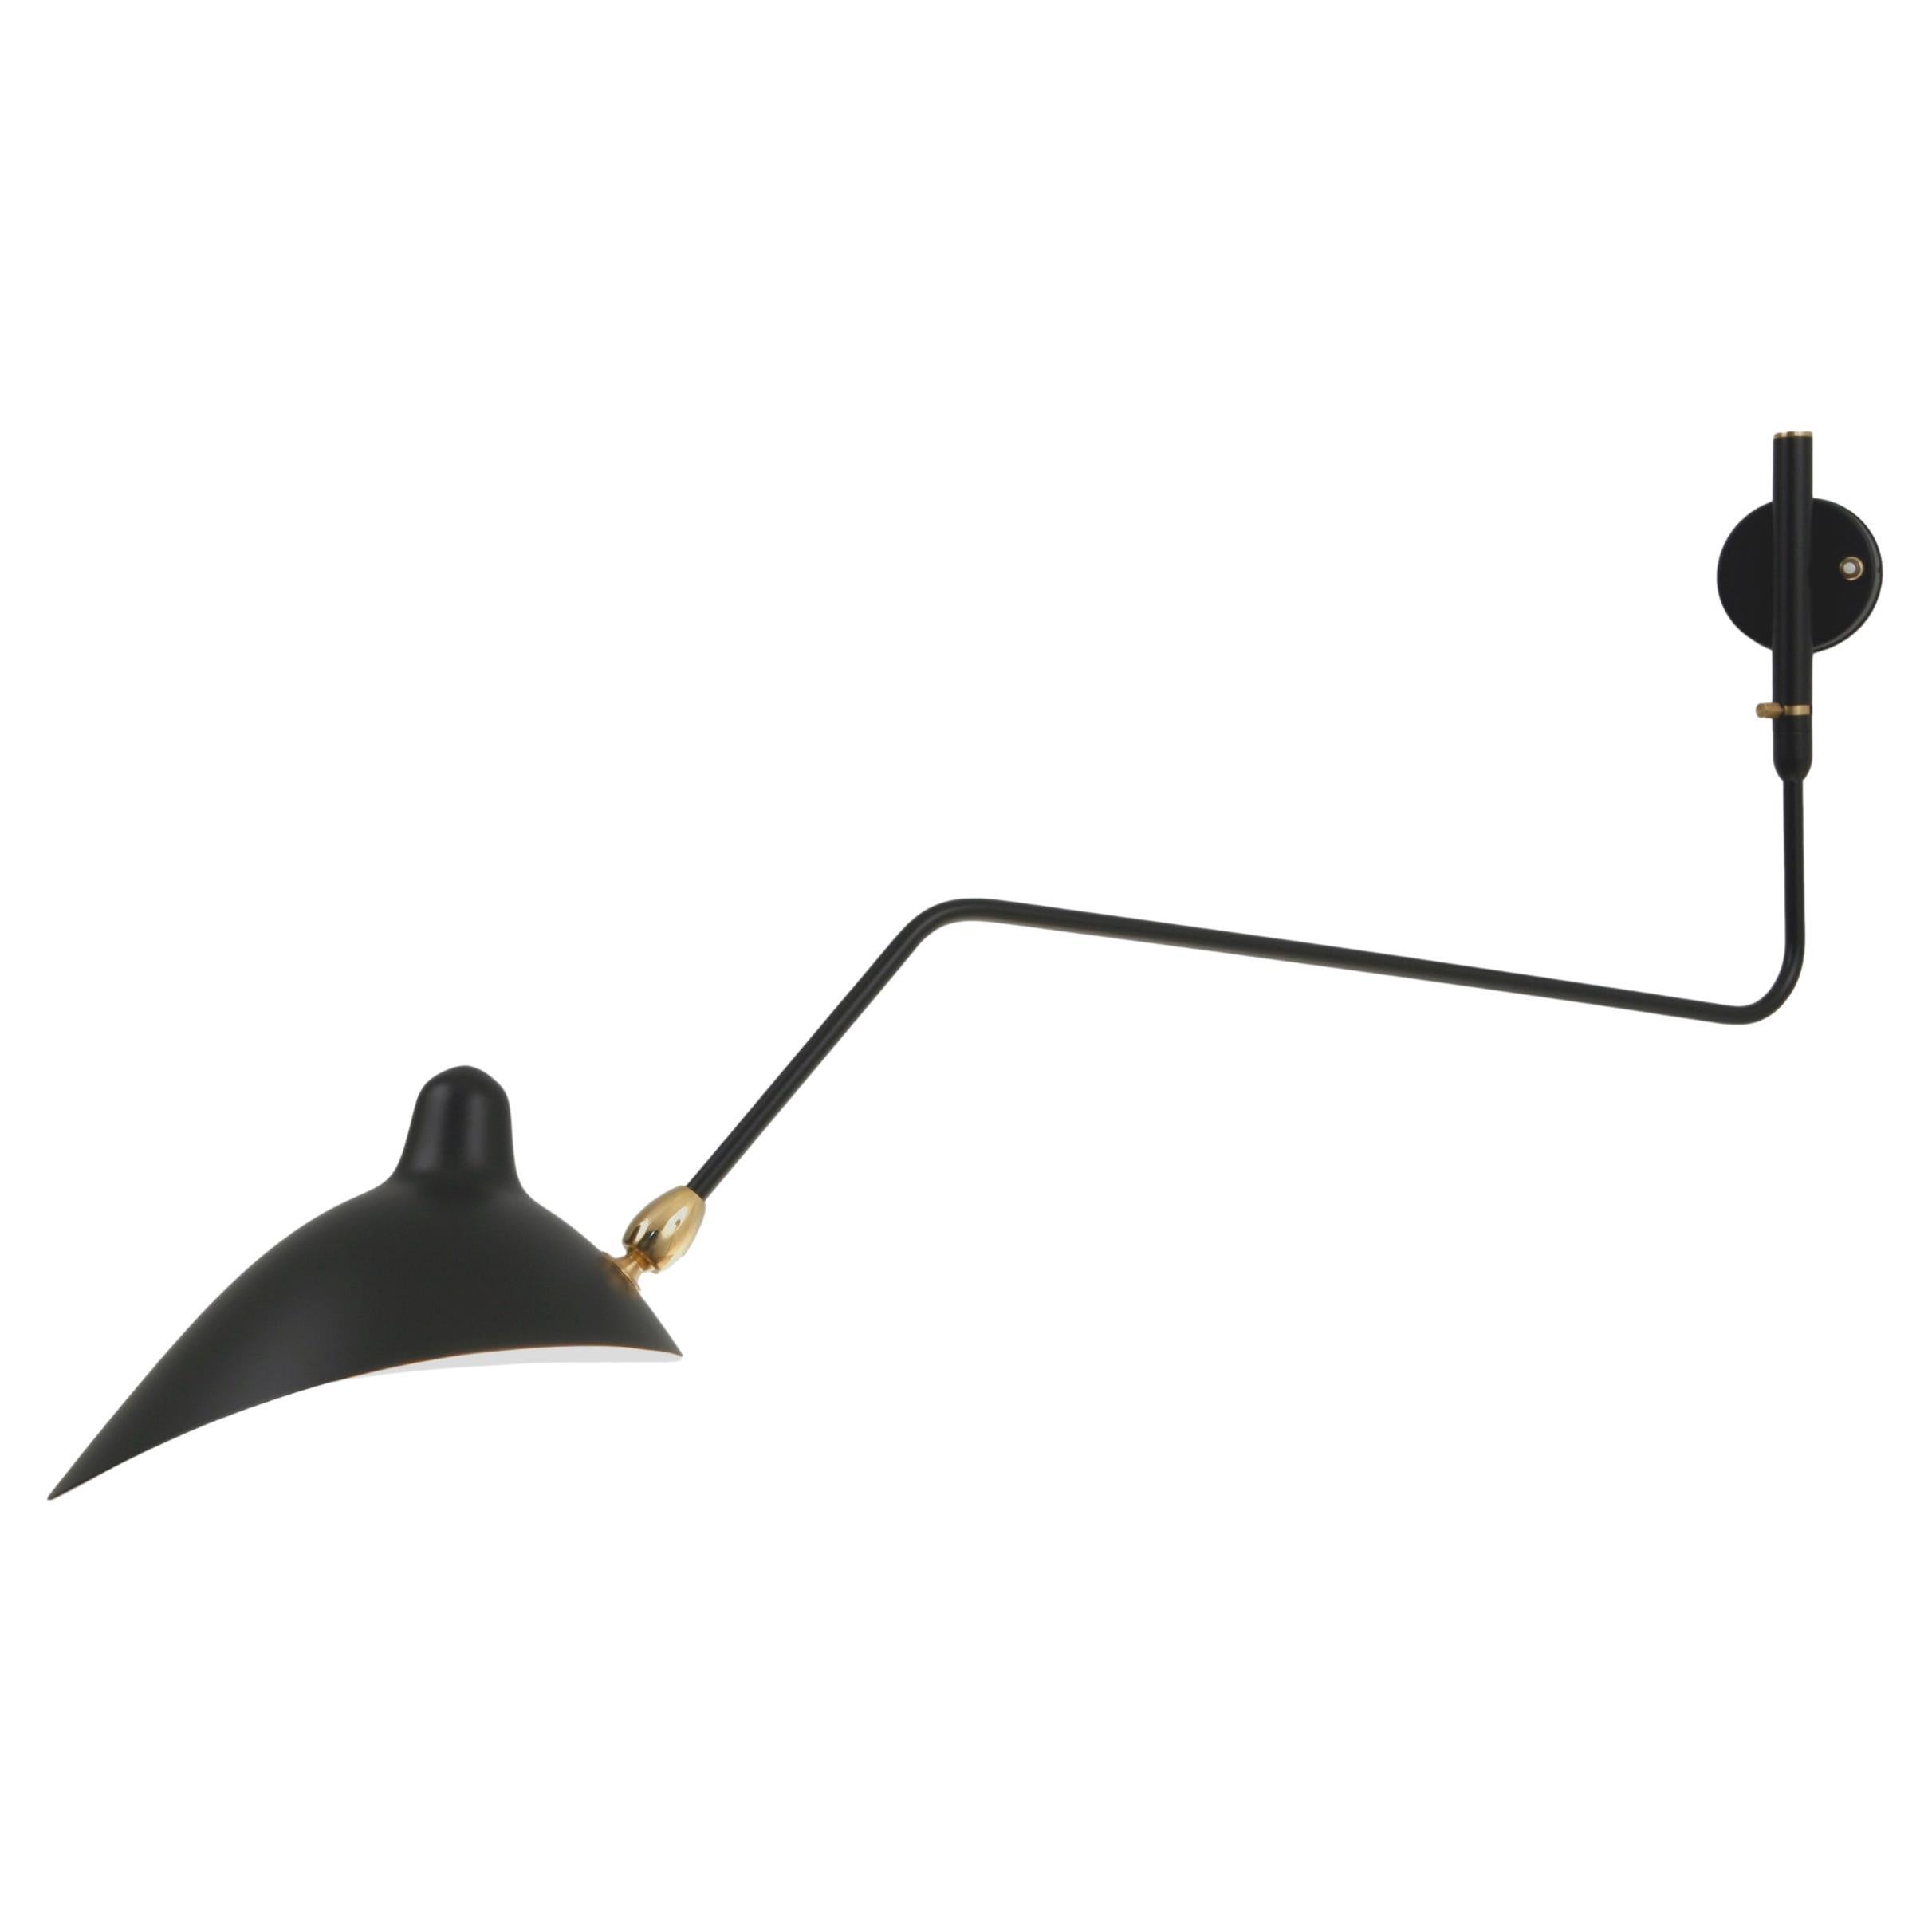 Serge Mouille - Rotating Sconce with 1 Curved Arm For Sale